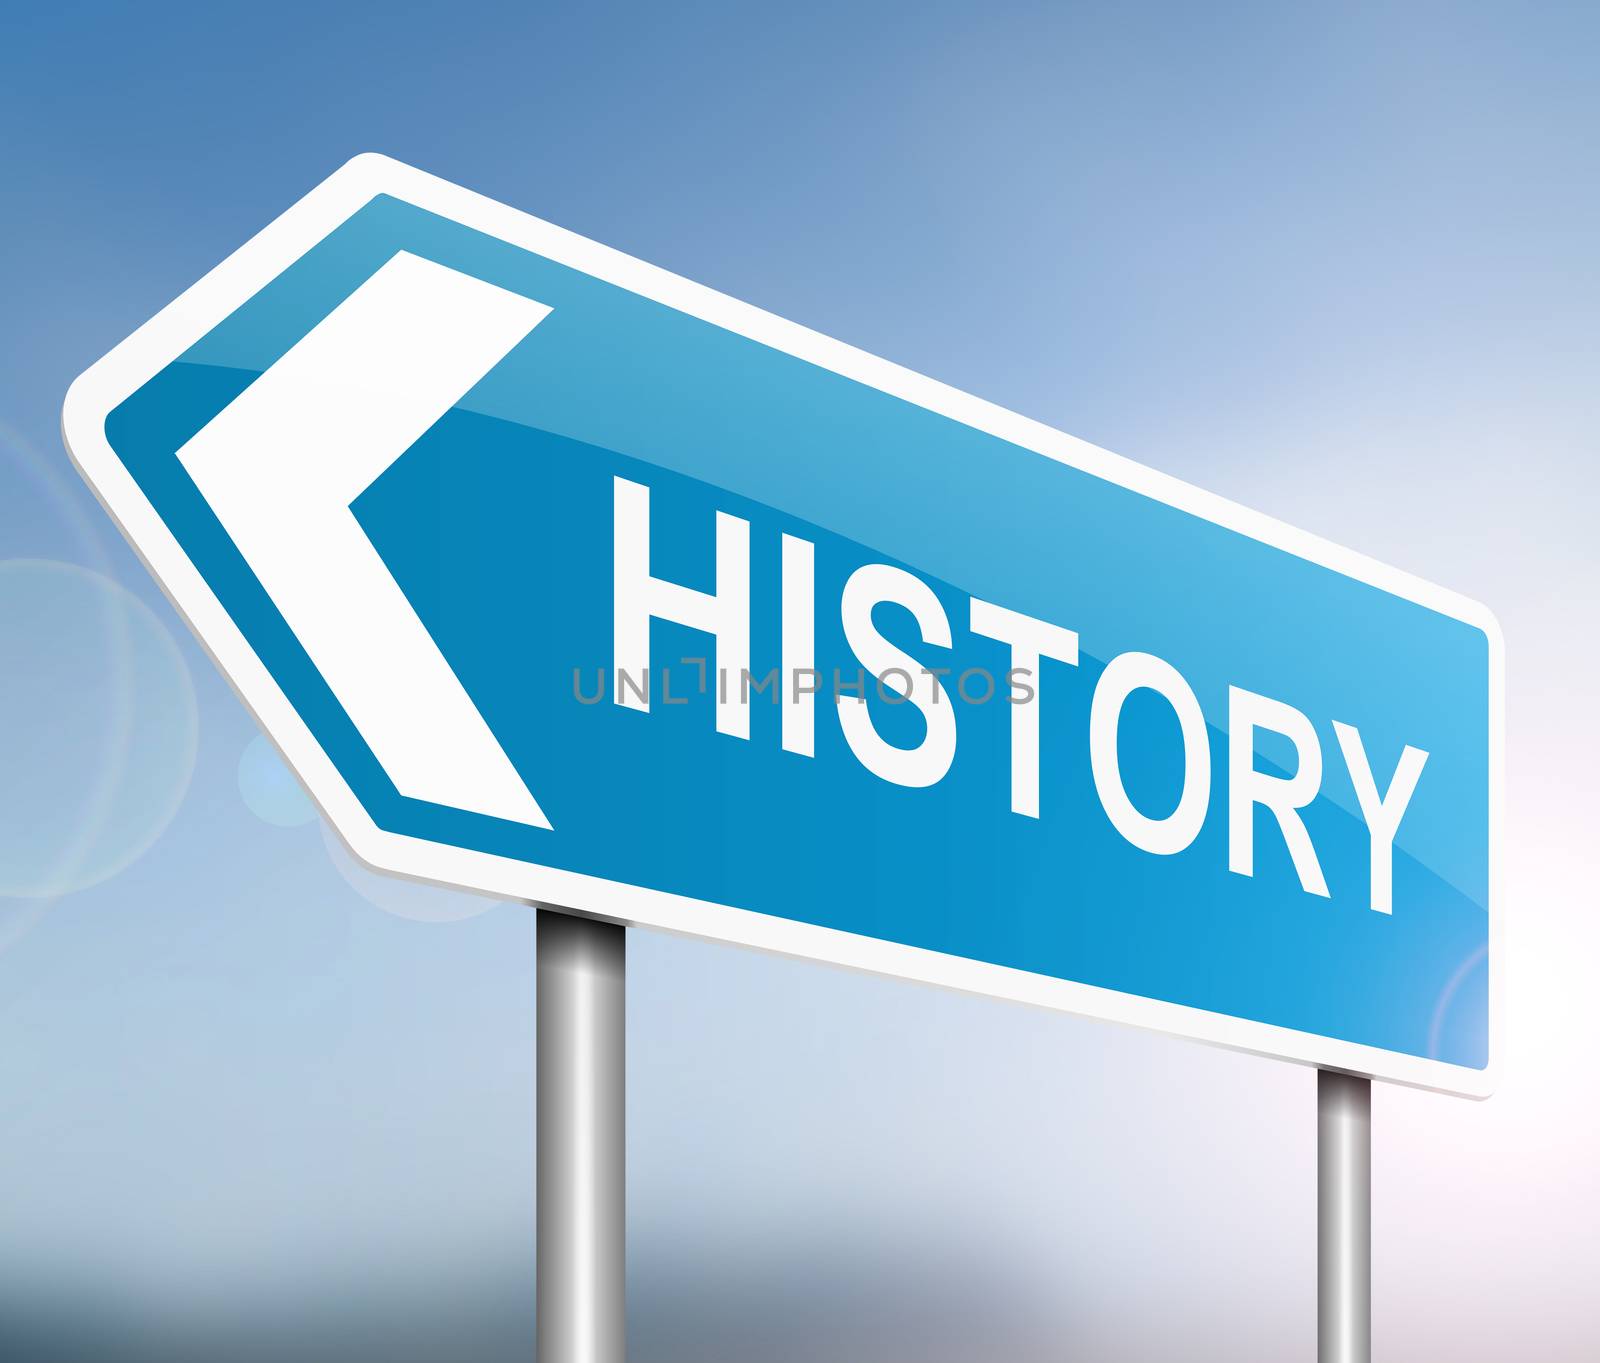 Illustration depicting a sign with a History concept.